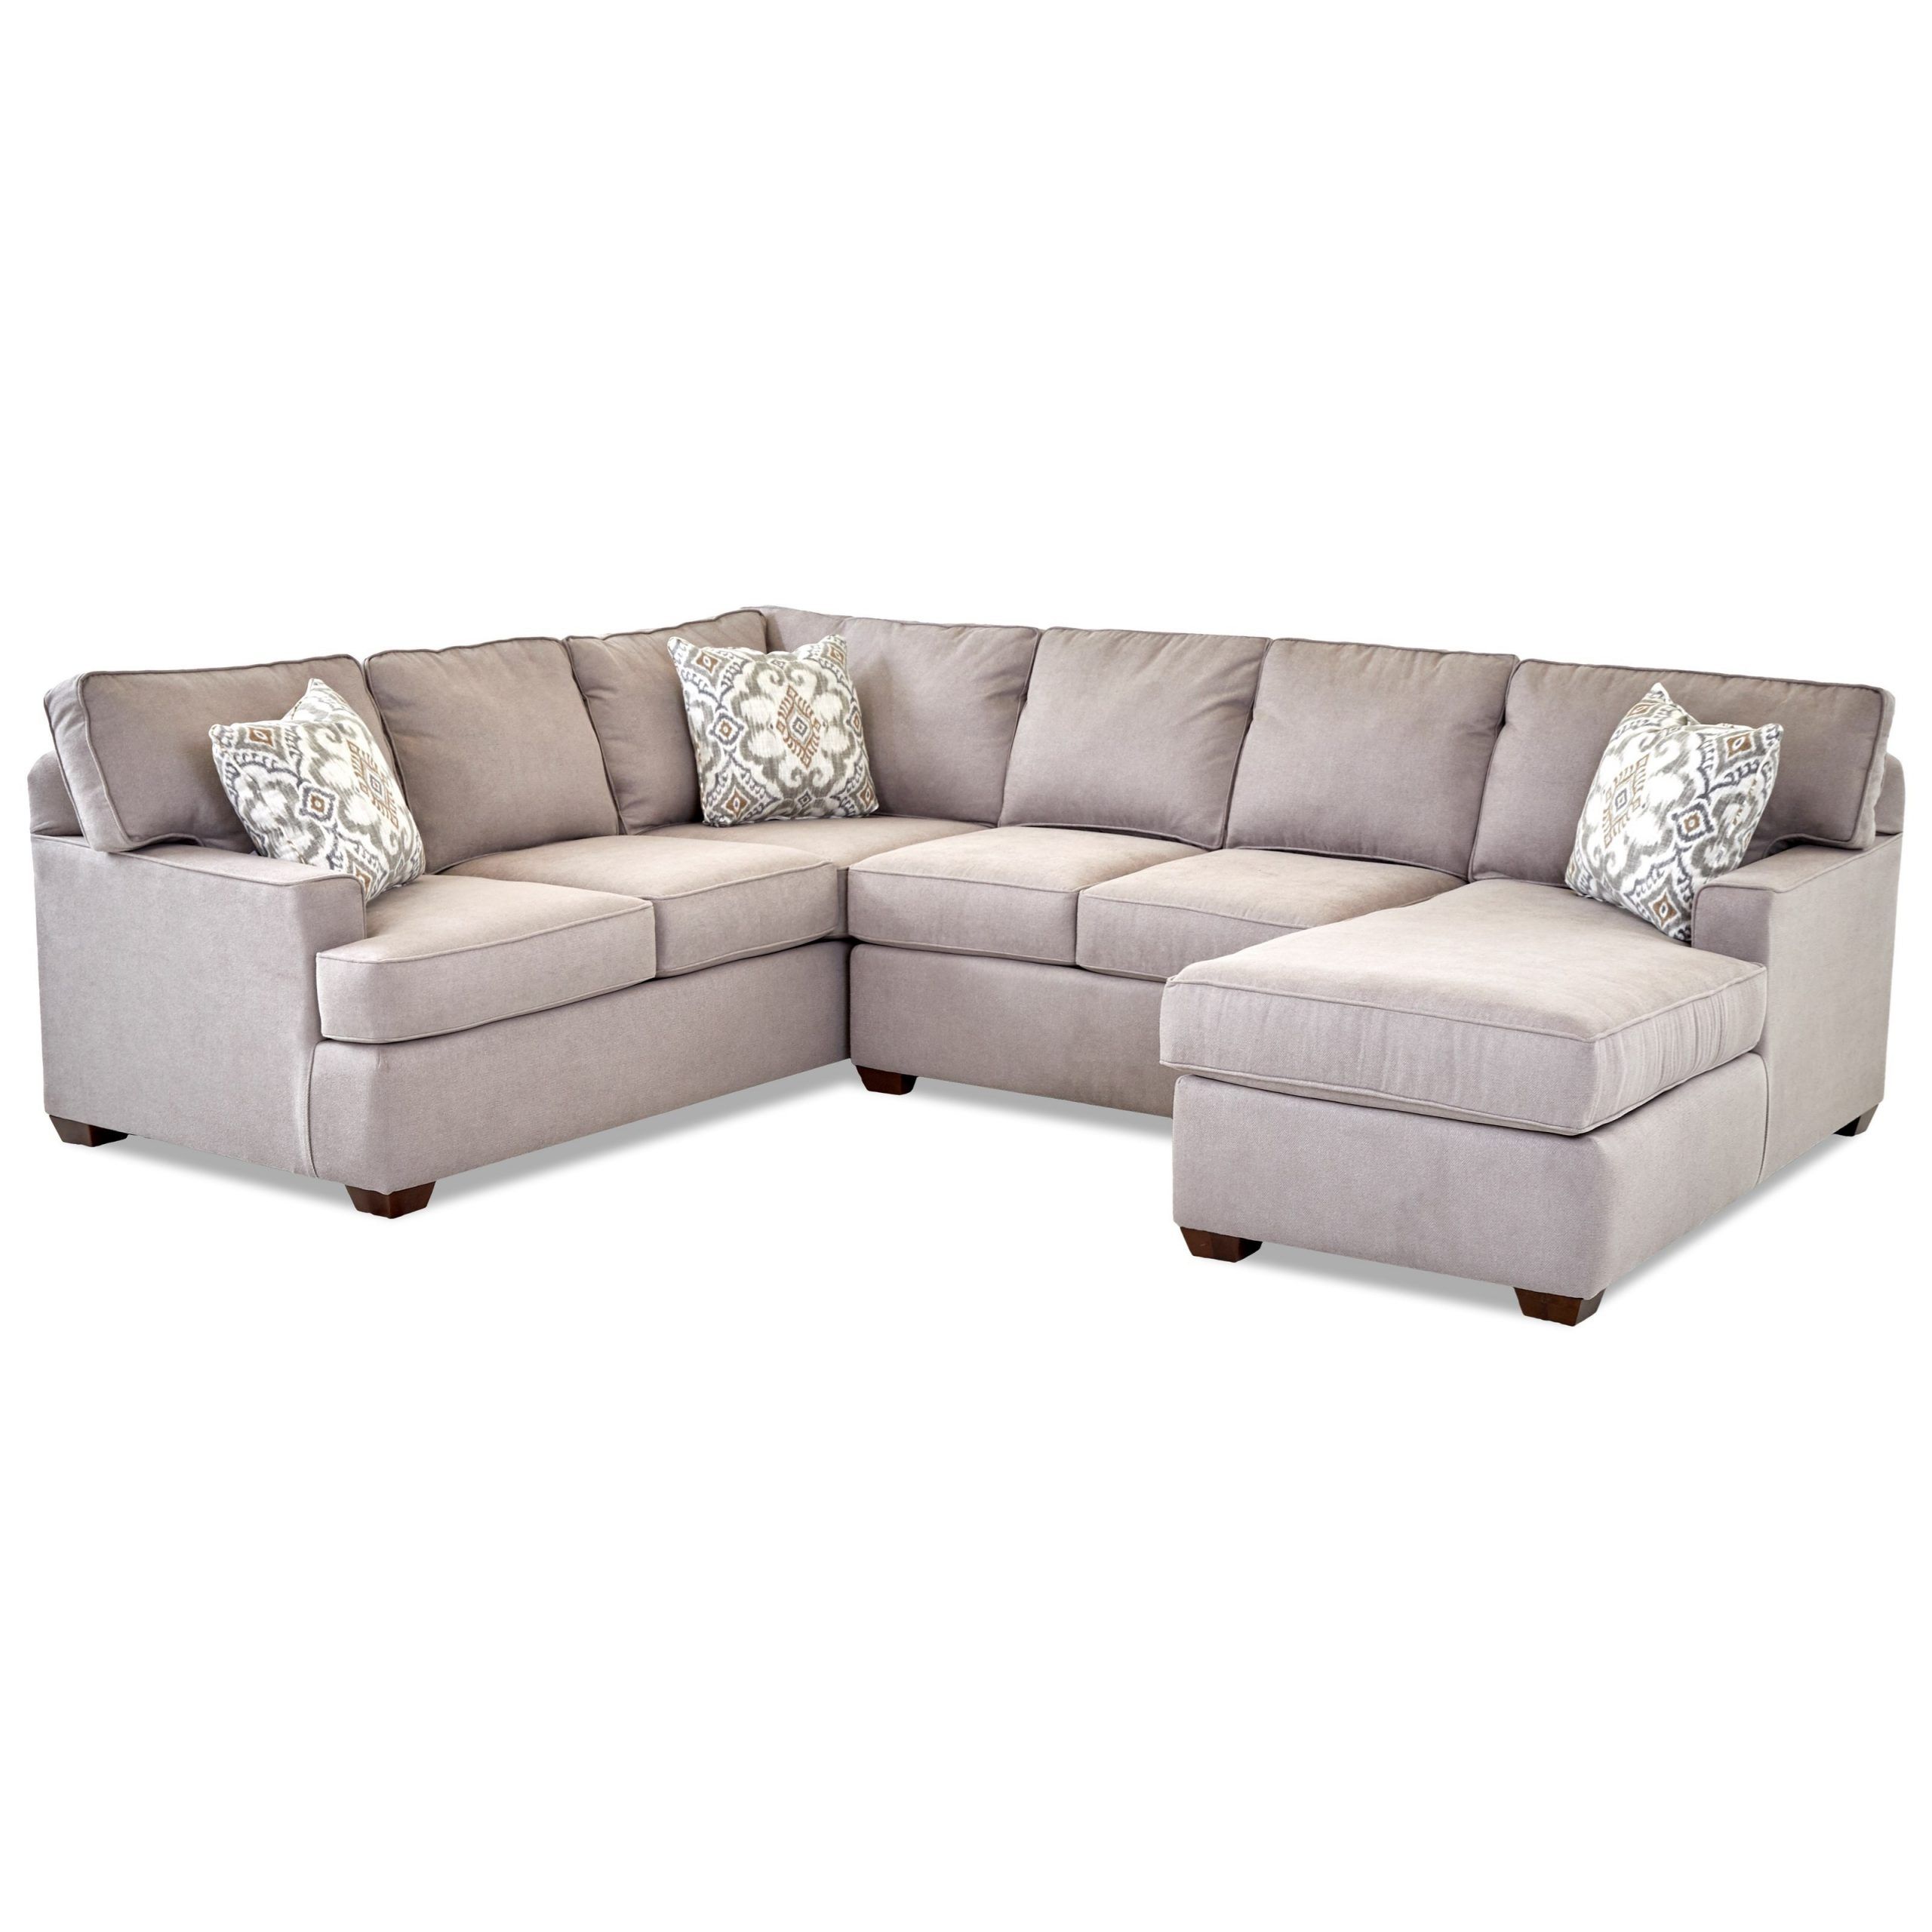 Klaussner Pantego 3 Piece Sectional Sofa With Raf Chaise Regarding 3Pc Miles Leather Sectional Sofas With Chaise (View 1 of 15)